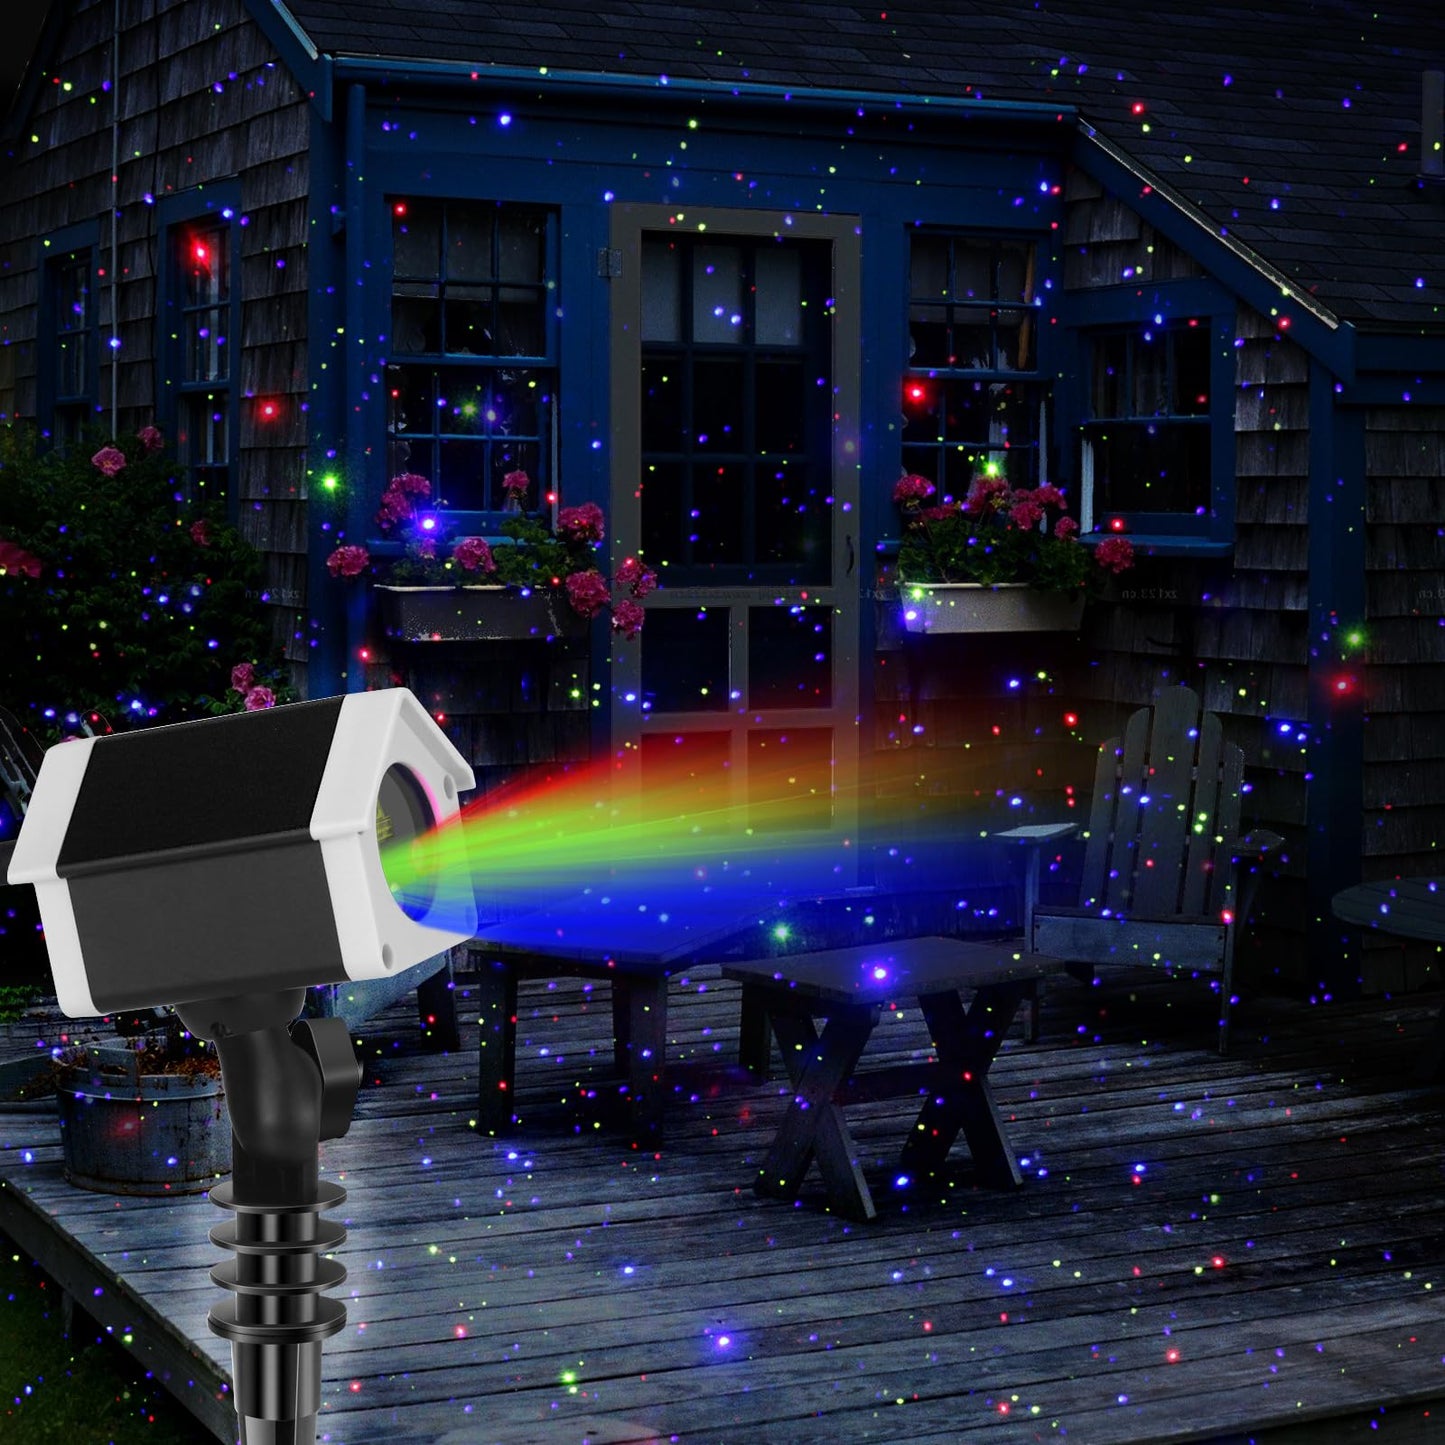 Lunmore Laser Projector Firefly Lights, Motion Christmas Light with Remote Control, Waterproof Garden Decorative Lights for Indoor/Outdoor, Garden, Park, Patio